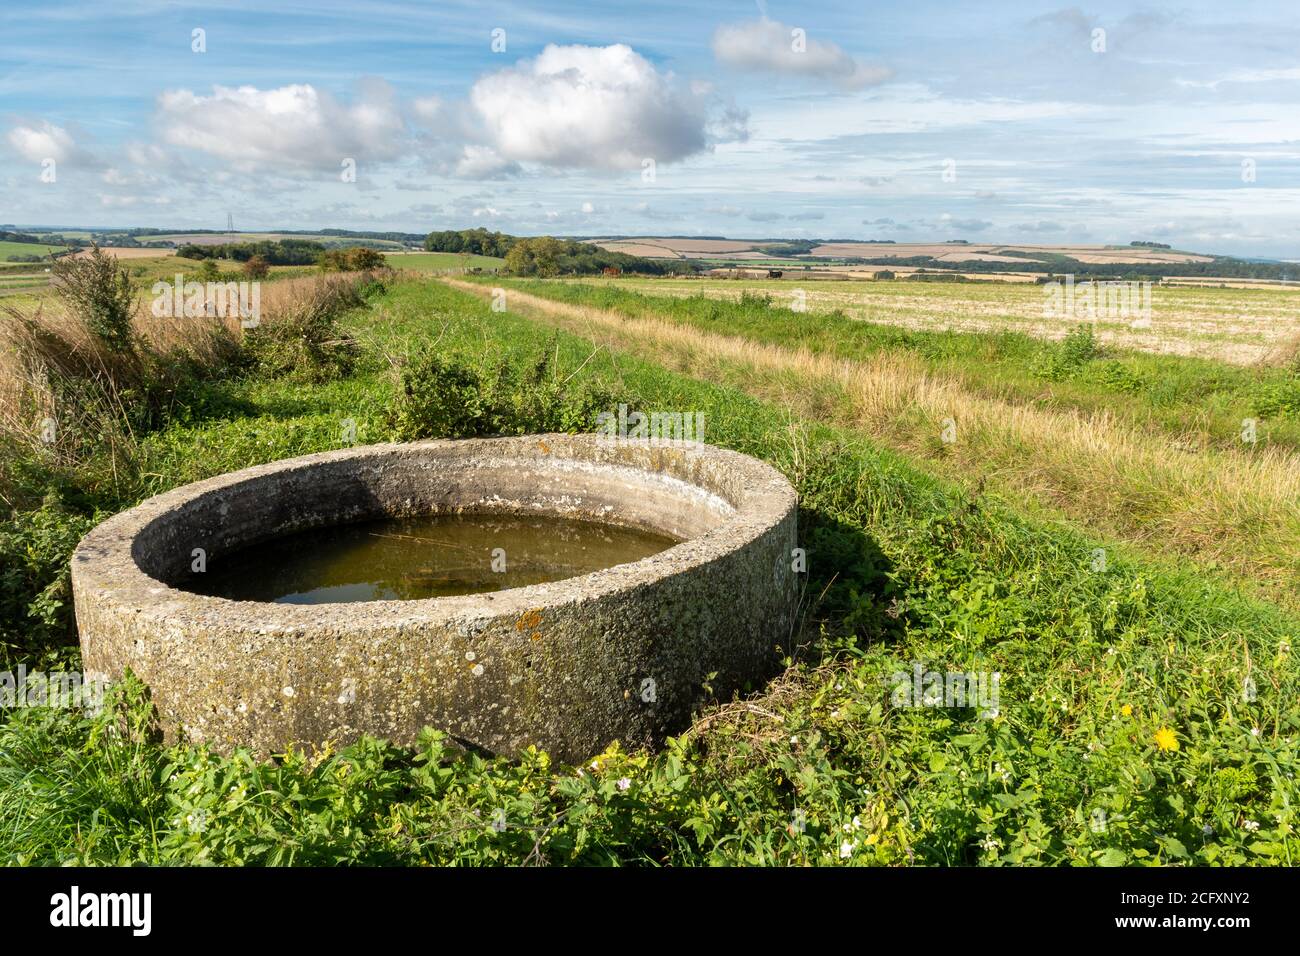 Countryside farmland landscape in the North Wessex Downs AONB near Wexcombe, Wiltshire, UK, with an unusual circular water trough in the foreground Stock Photo